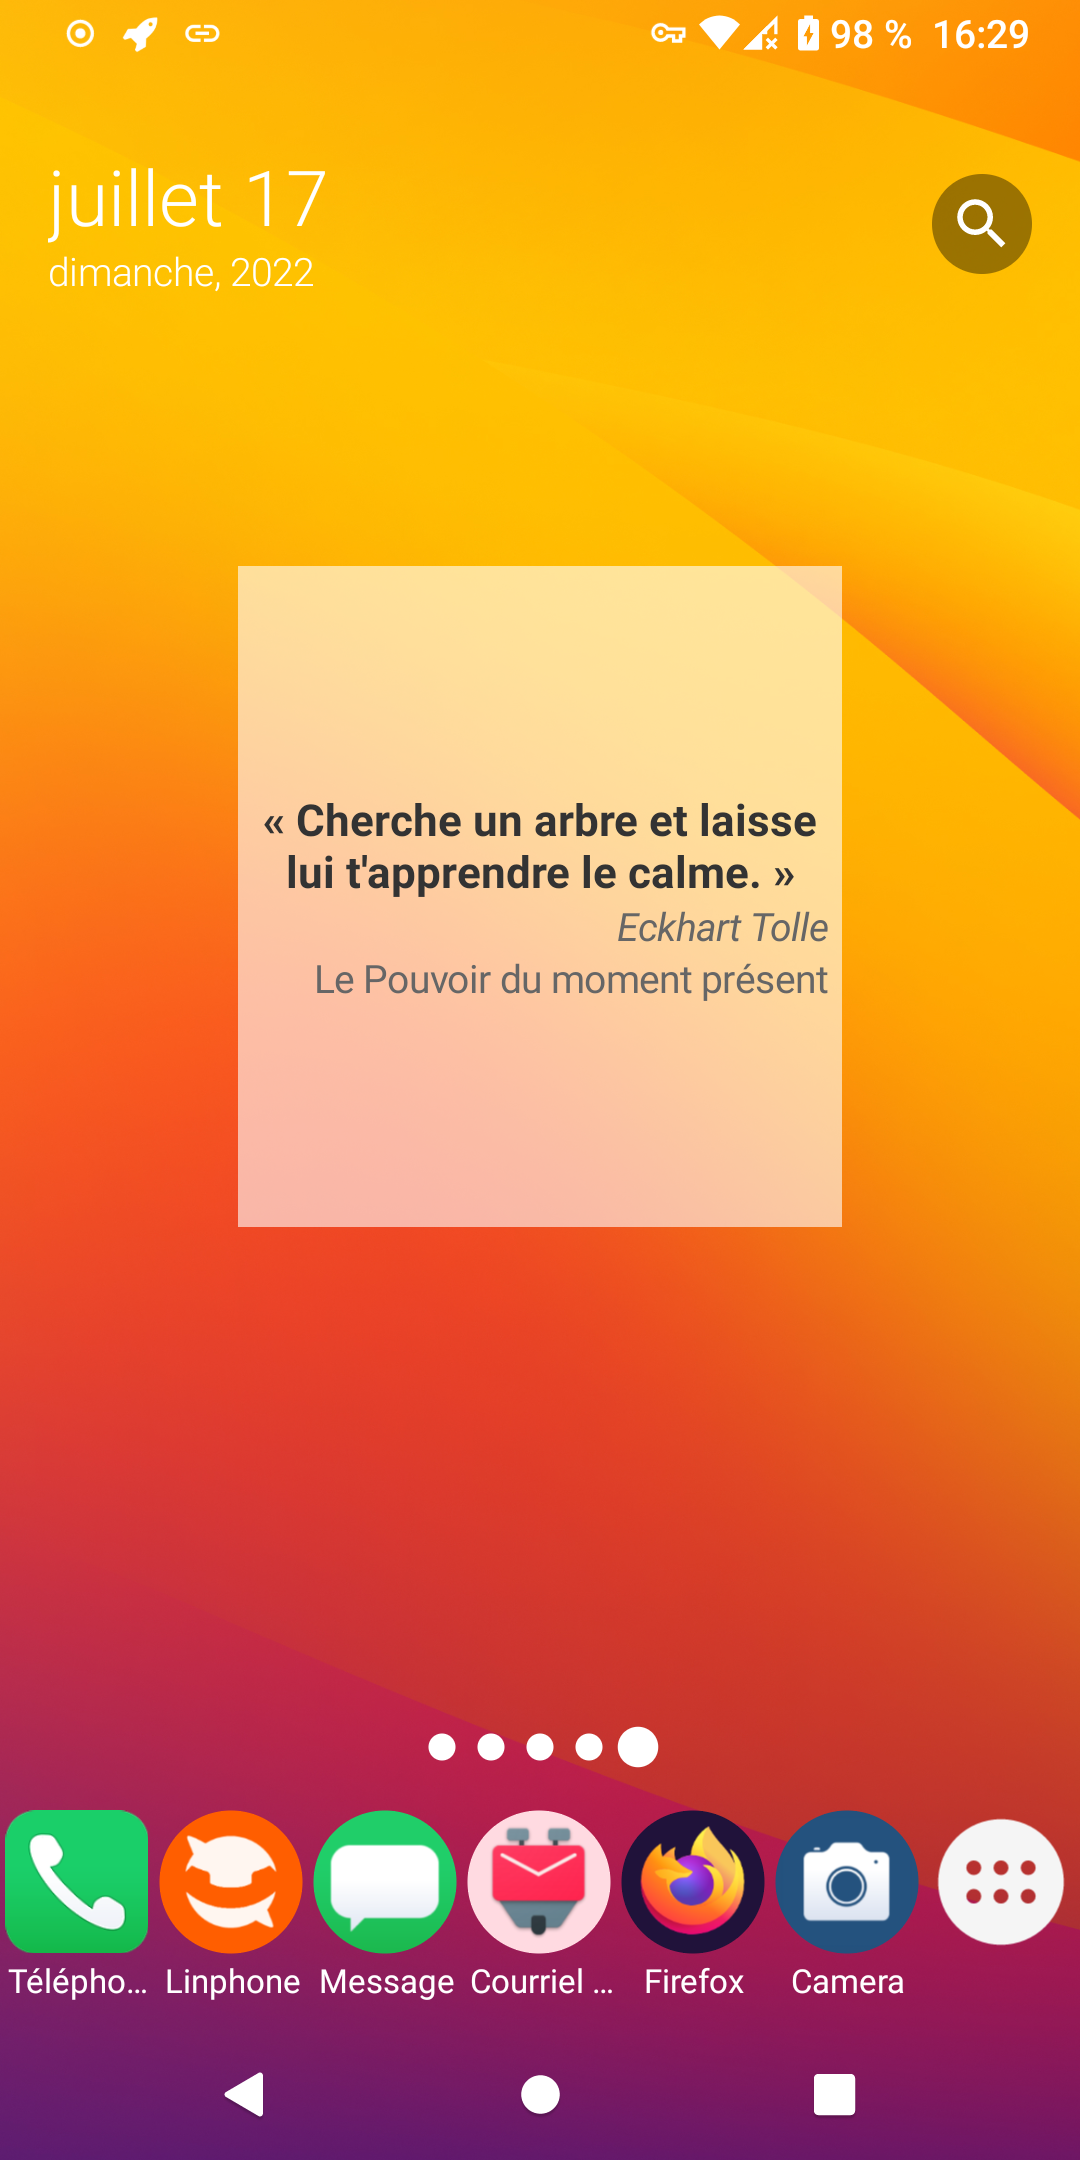 Nom : 02_widget_eckhart_tolle.png
Affichages : 179
Taille : 1,57 Mo